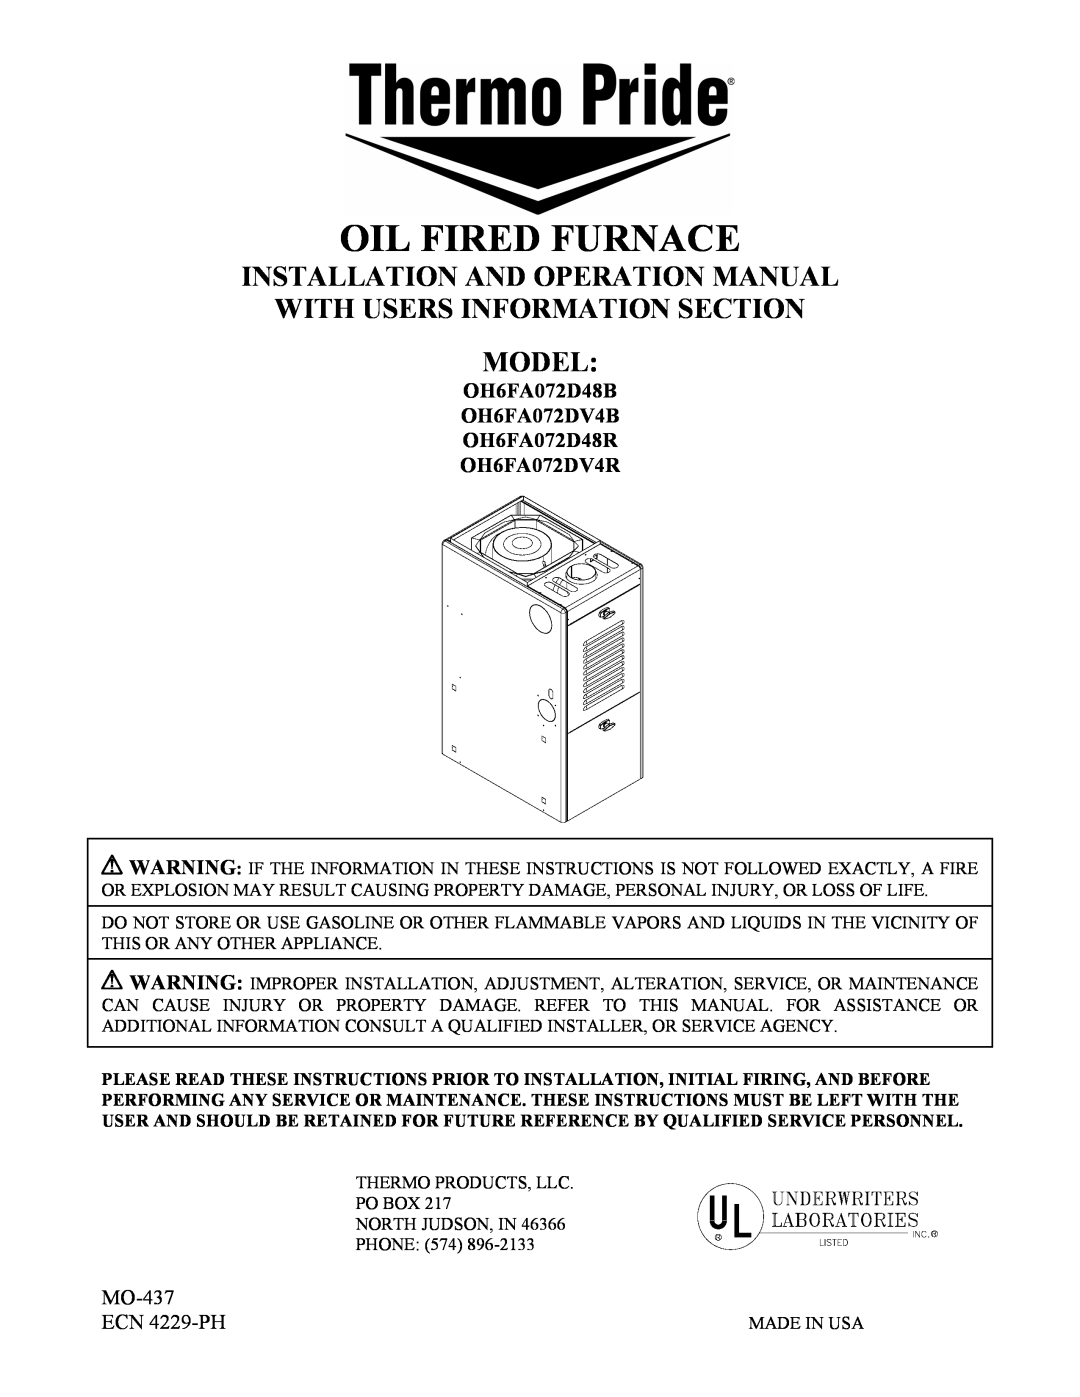 Thermo Products OH65FA072DV4B, OH65FA072DV4R operation manual Oil Fired Furnace, Installation And Operation Manual 